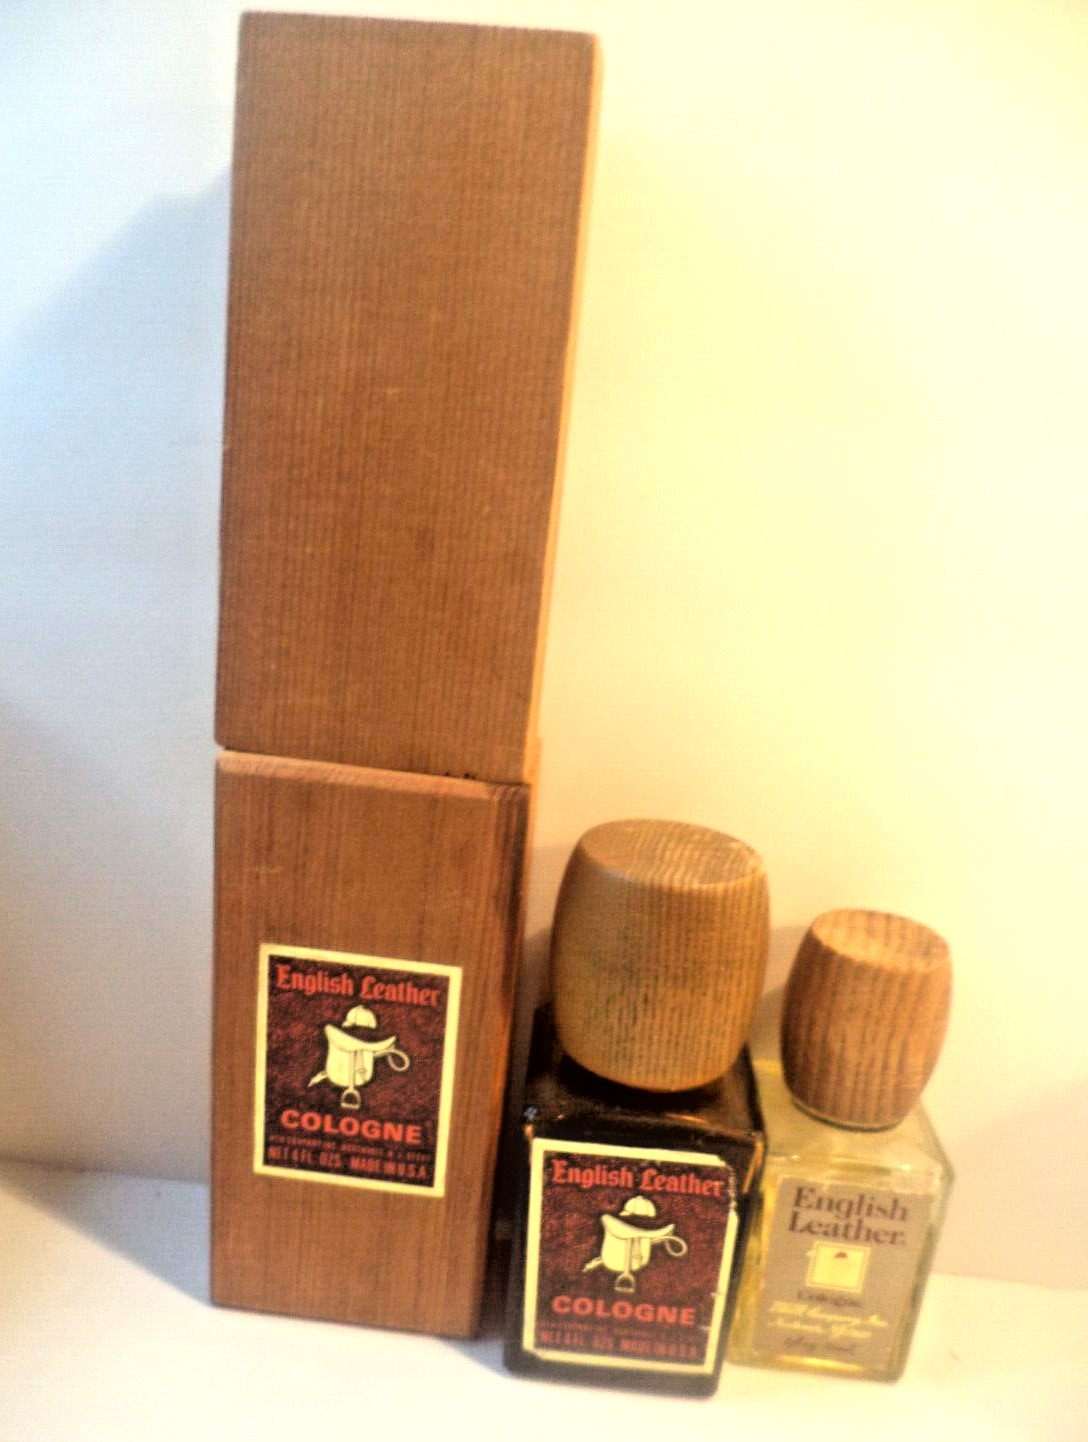 English Leather Cologne 4 oz 80% full with box & 2 Oz 1/3 full